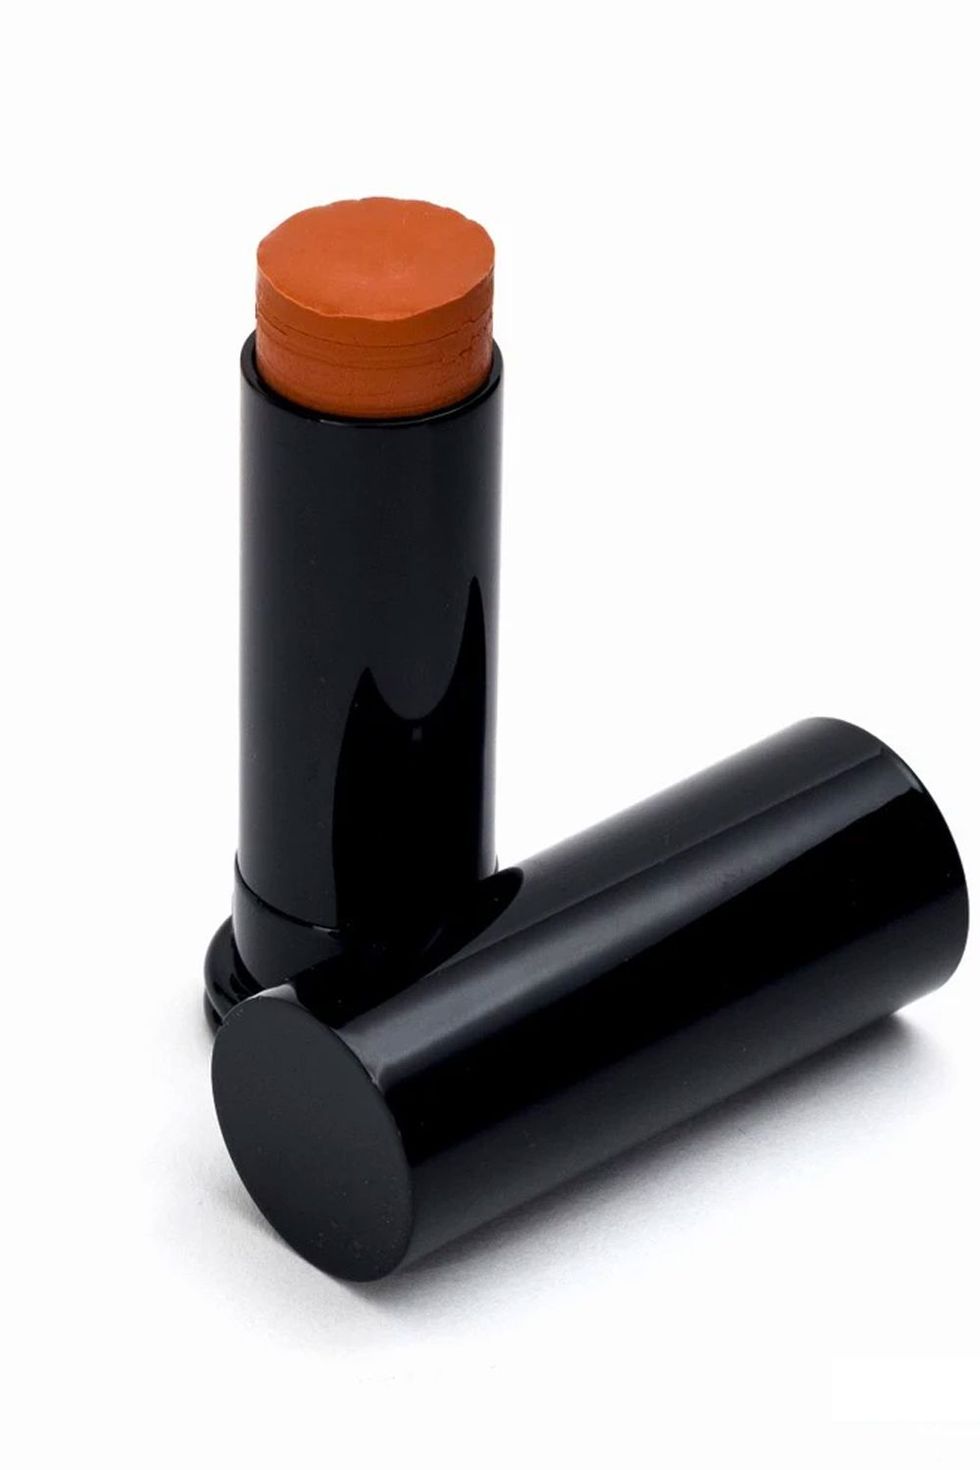 Laws of Nature Cosmetics Stick Foundation